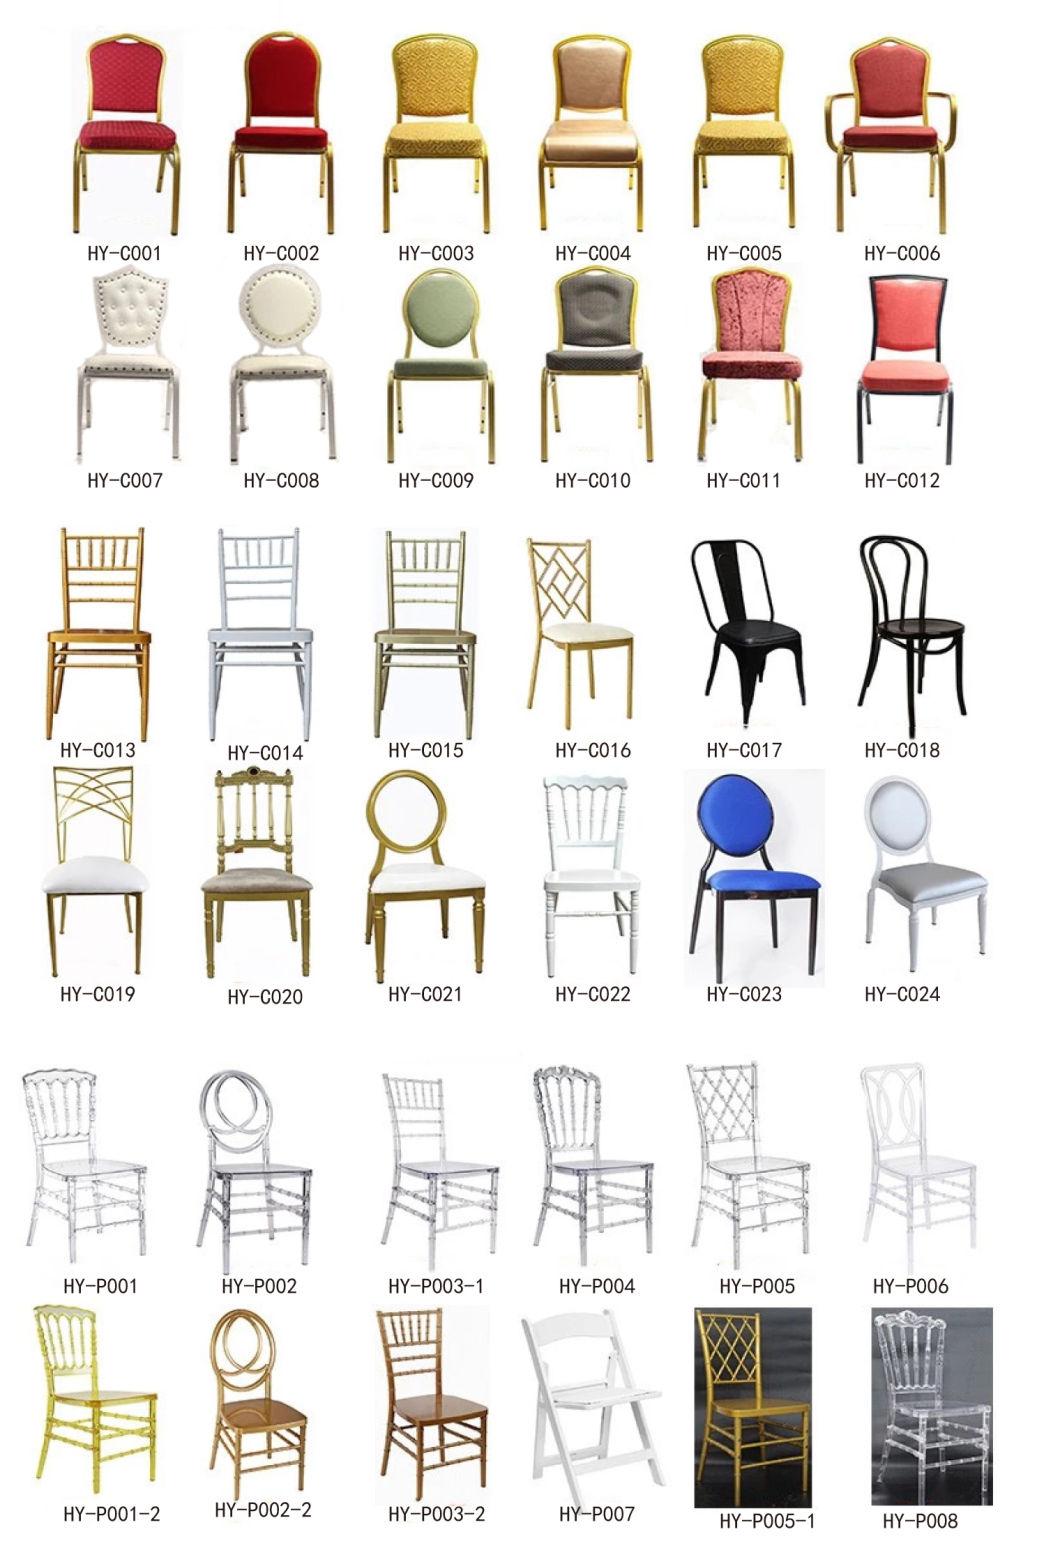 China Factory Wholesale Event Party Wedding Chairs Use Dining Room Furniture Plastic Folding Chair Restaurant Stack Chair Lightweight Cafe Chair